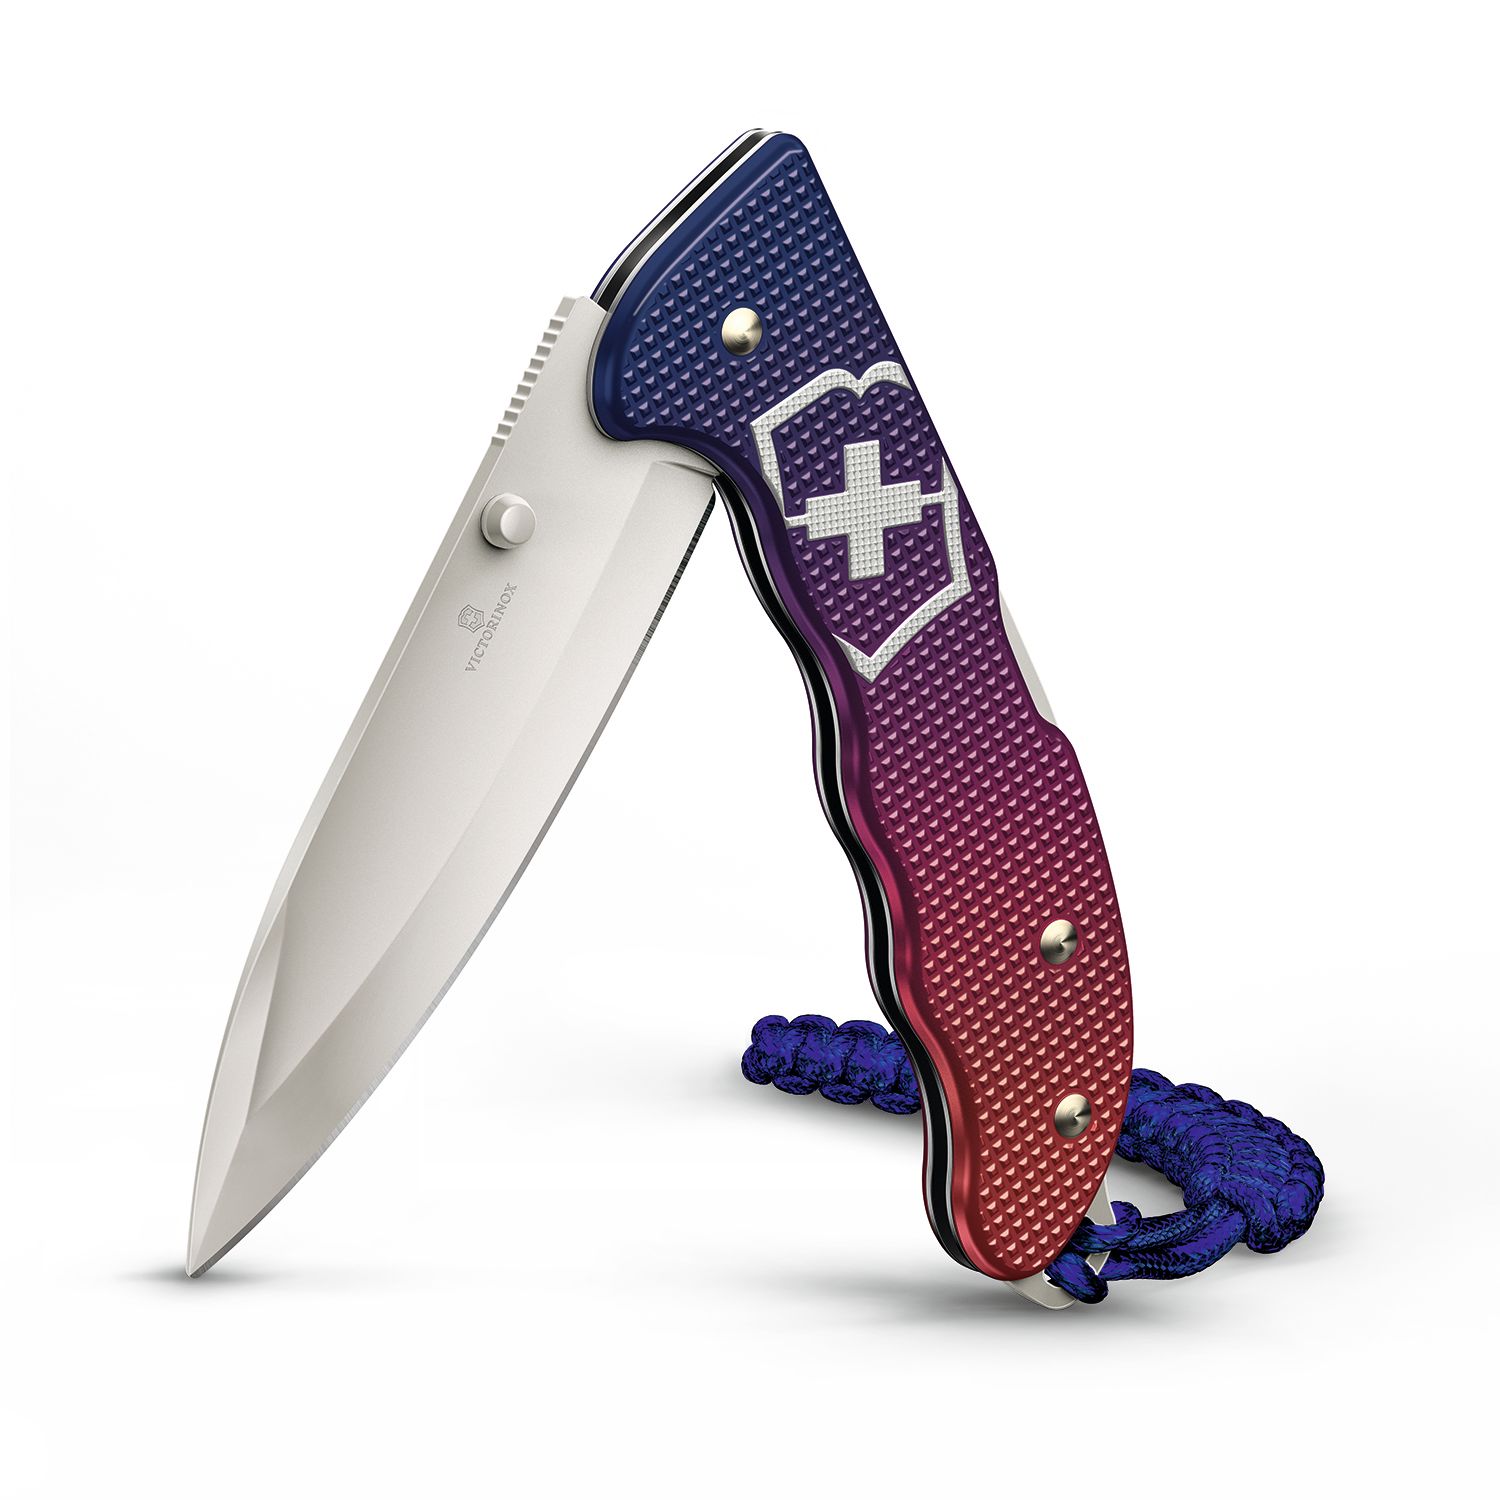 Victorinox Swiss Army Evoke Folding Knife 3.875 Bead Blast Drop Point Blade,  Blue/Red Gradiant Alox Handles with Clip and Paracord Lanyard - KnifeCenter  - 0.9415.D221